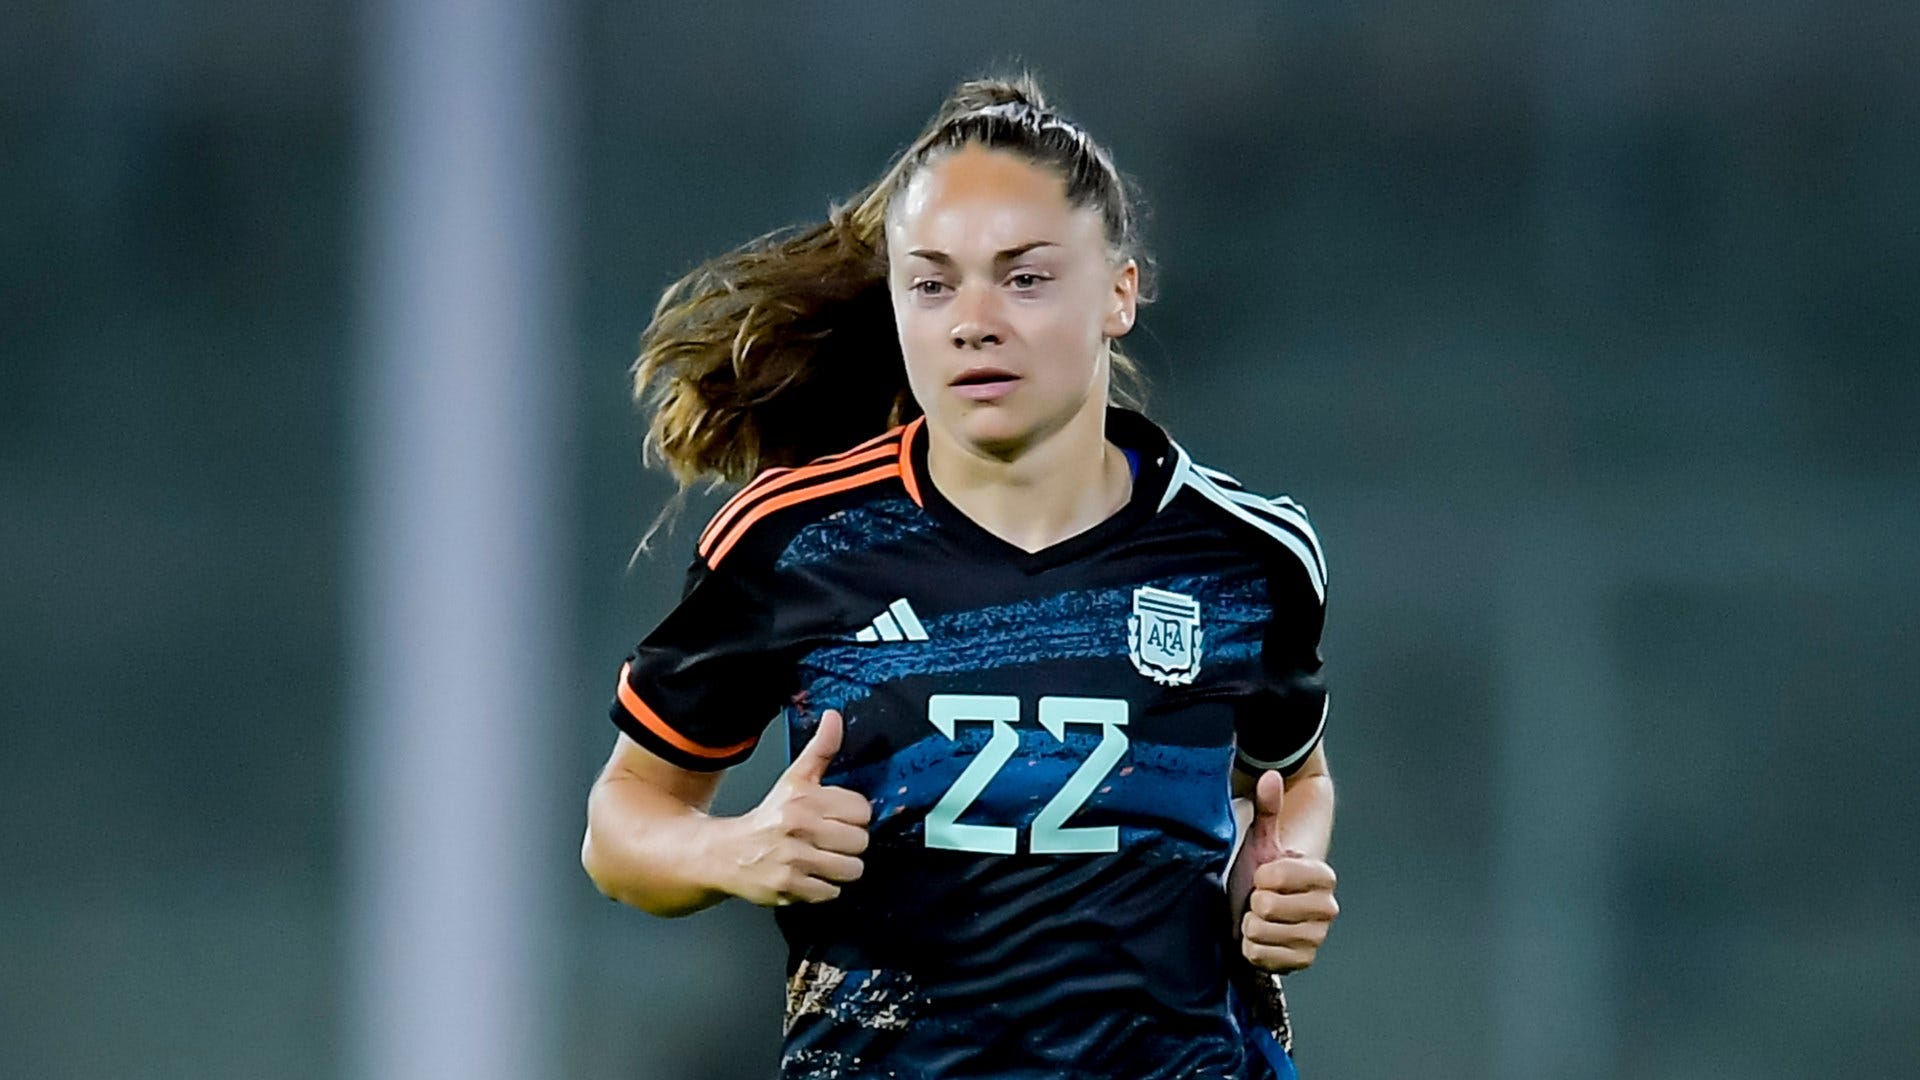 Argentina Women vs South Africa Women Live stream, TV channel, kick-off time and where to watch Goal UK